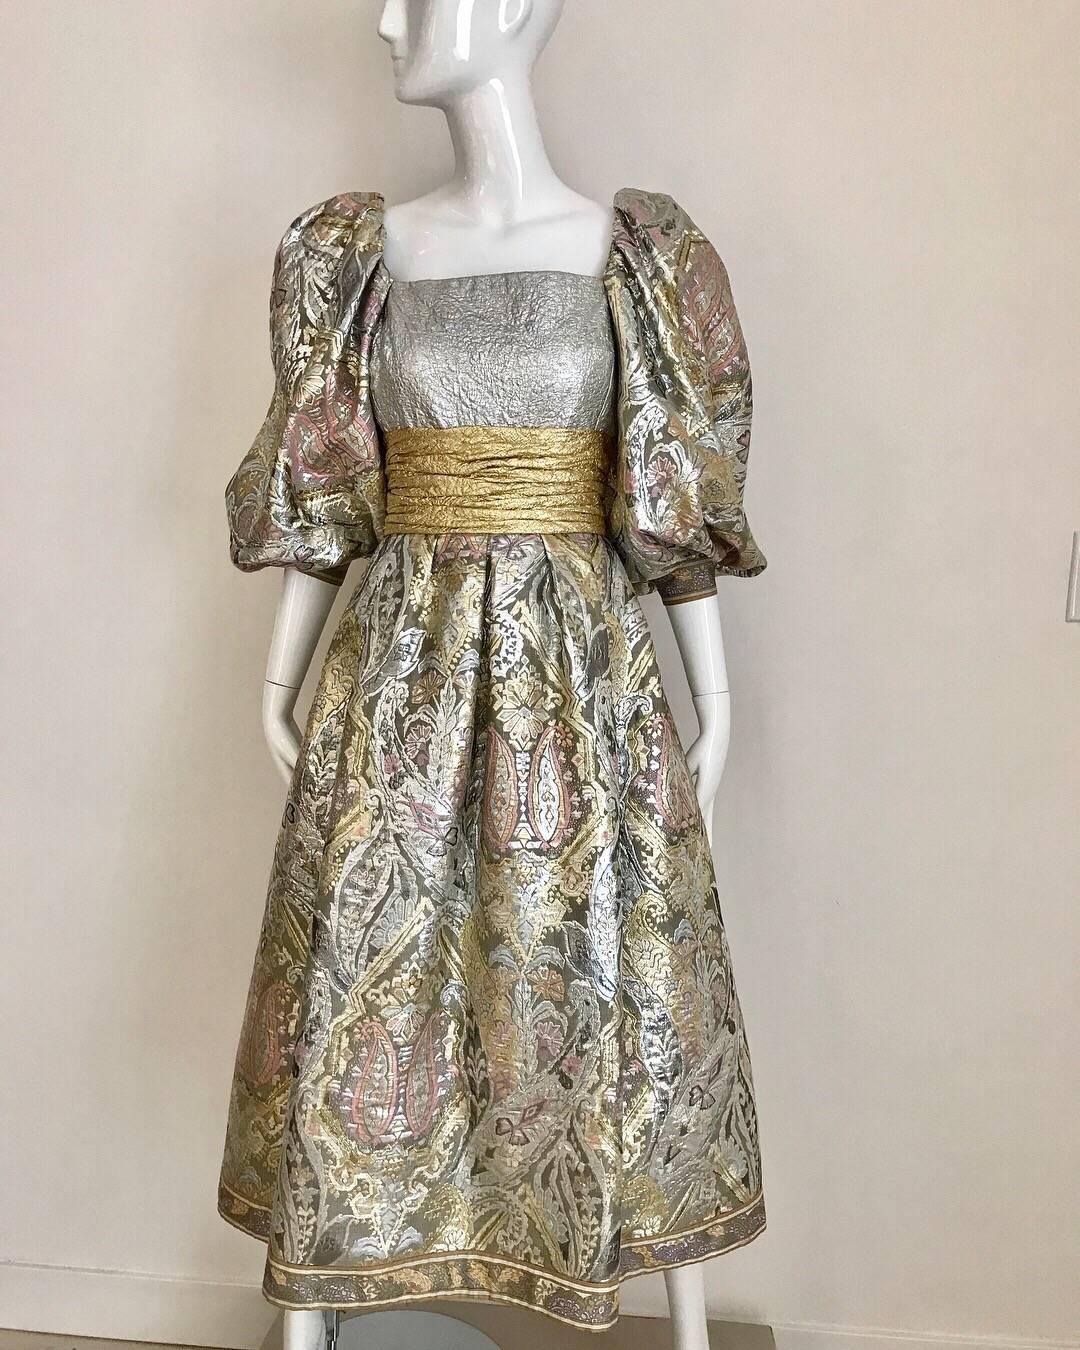 Dramatic vintage Leonard Brocade floral in dress in pink, silver grey metallic and large gold cummerbund  belt style. Sleeves can be worn off shoulder. Lined in silk.
Size: Medium 
Bust: 34” fit C cup/ or 36”
Waist: 30” / Dress length: 43”/ Sleeve